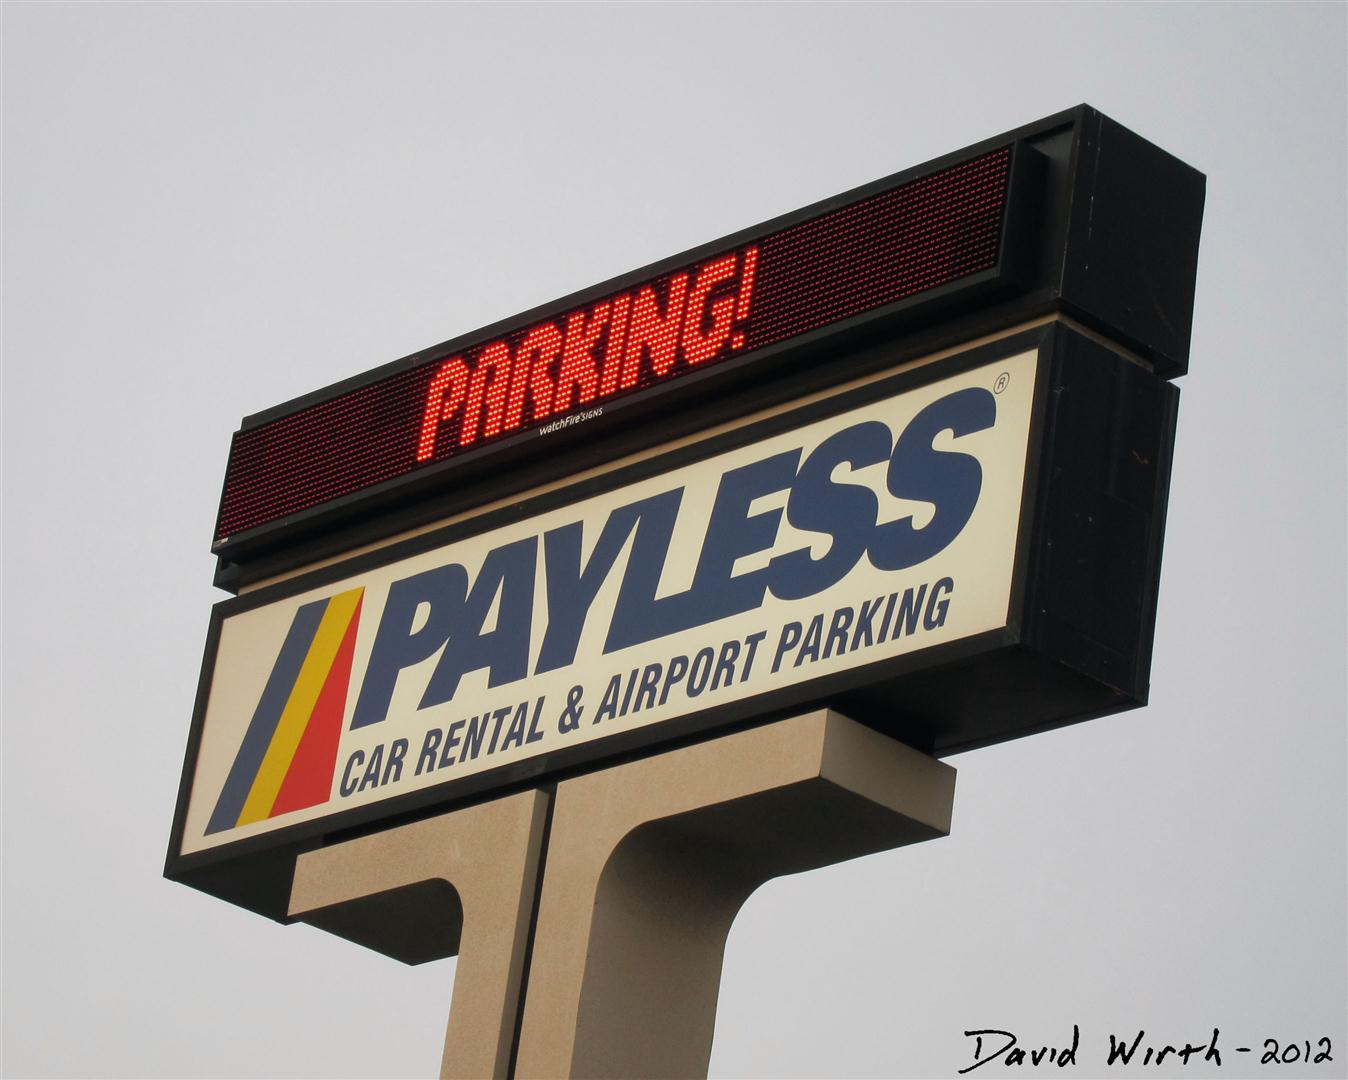 ... car. We reserved a budget economy car from Payless Rental. It turned